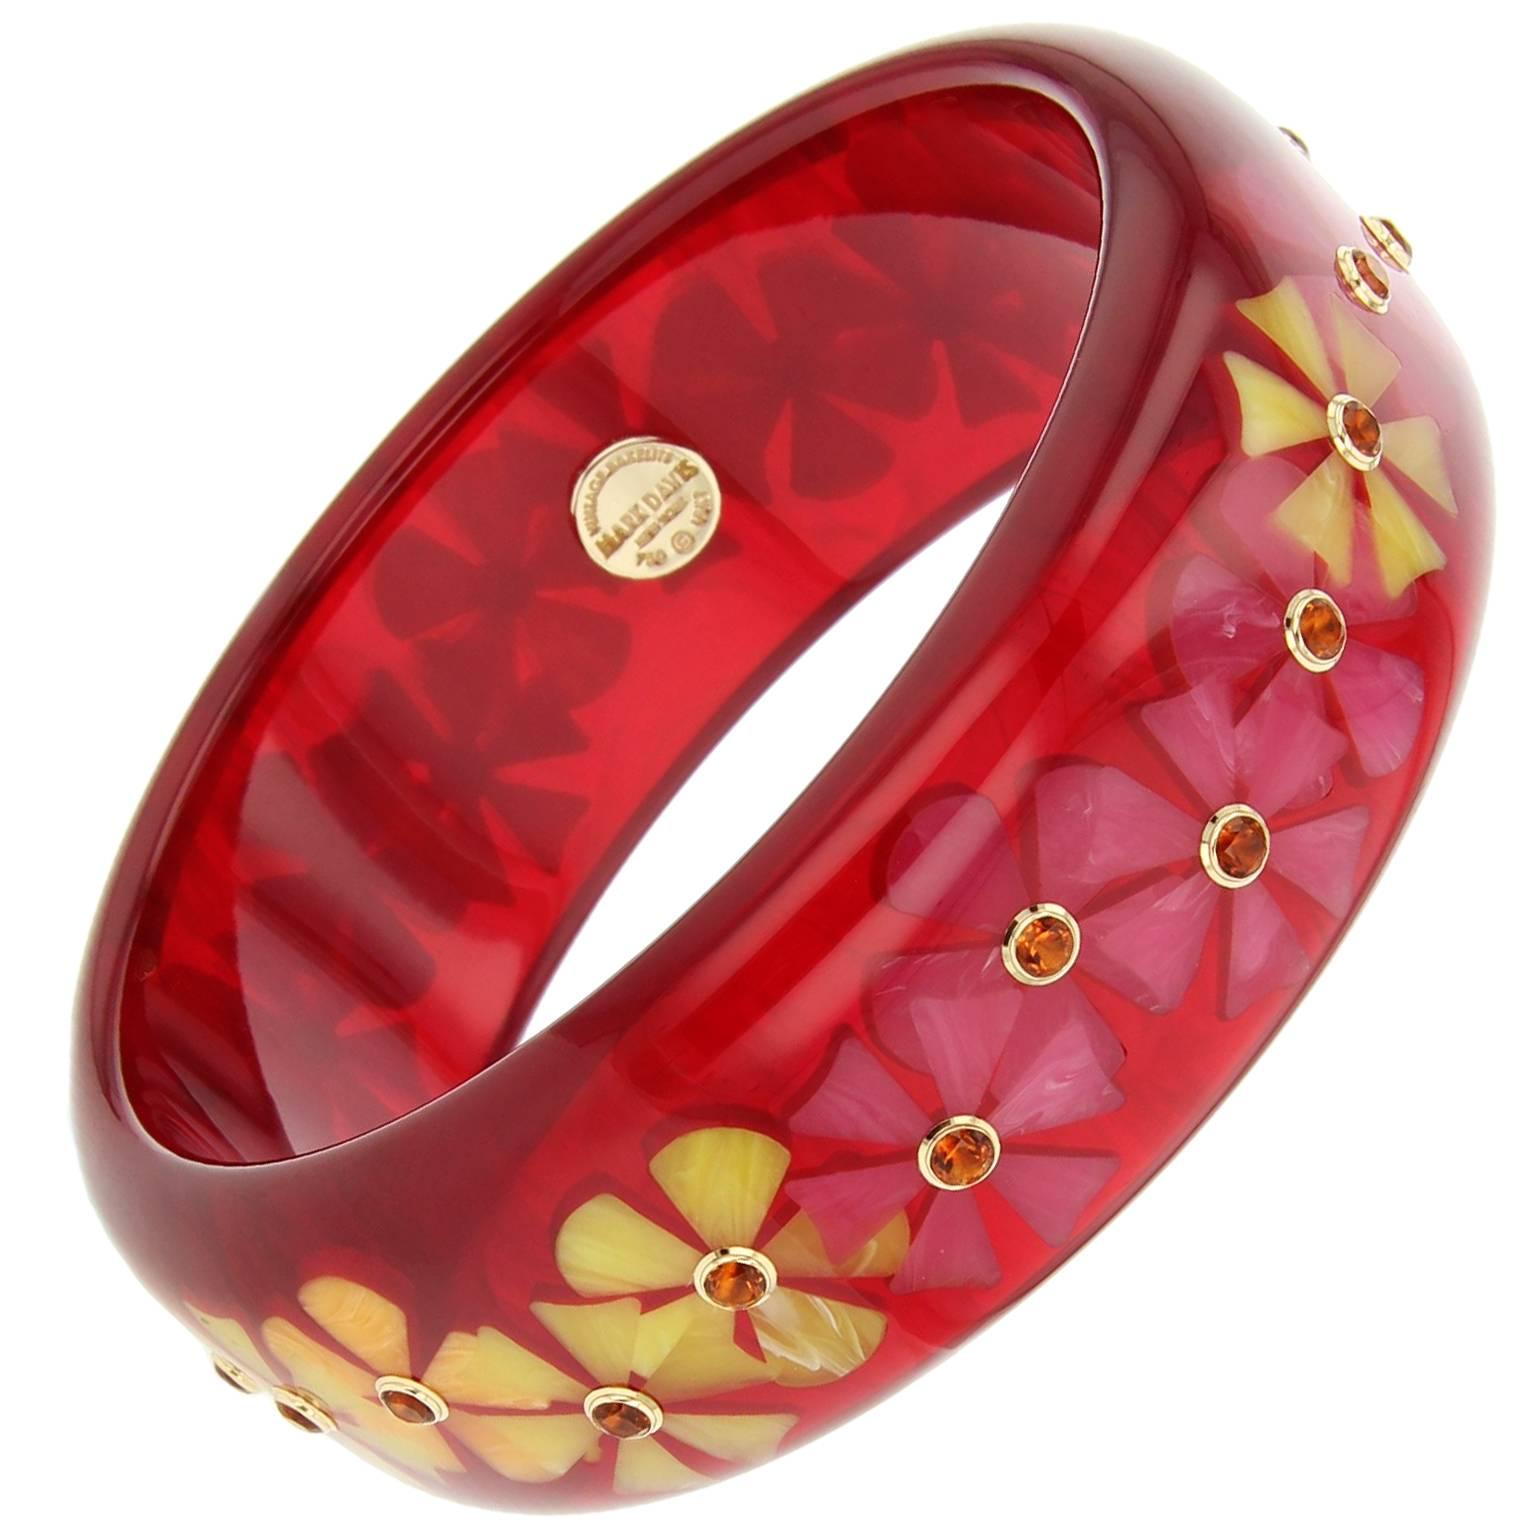 This unique and charming Mark Davis bangle was handcrafted of vintage prystal burgundy bakelite.  The two distinct flower motifs were intricately inlaid with pieces of orange, yellow and pink bakelite.  Each flower is centered with a citrine